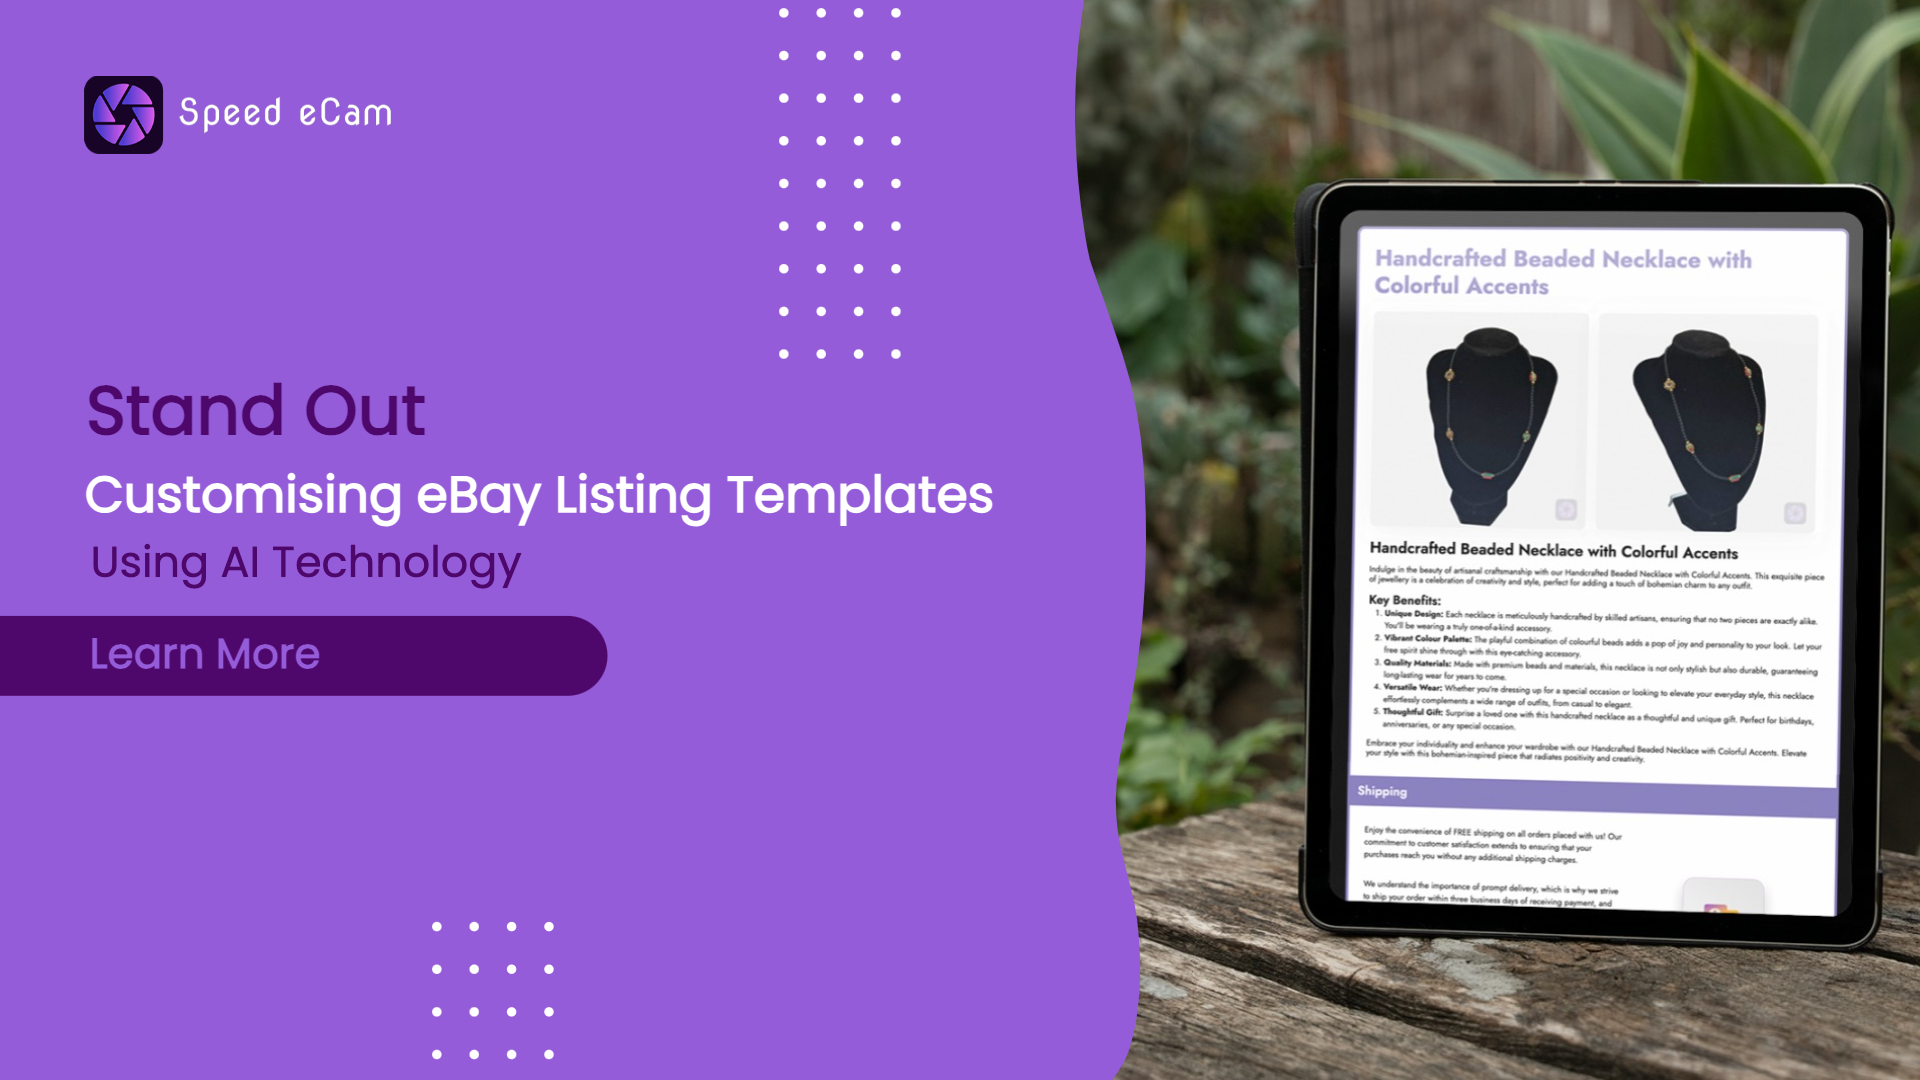 Stand Out: Customising your eBay Listing Templates